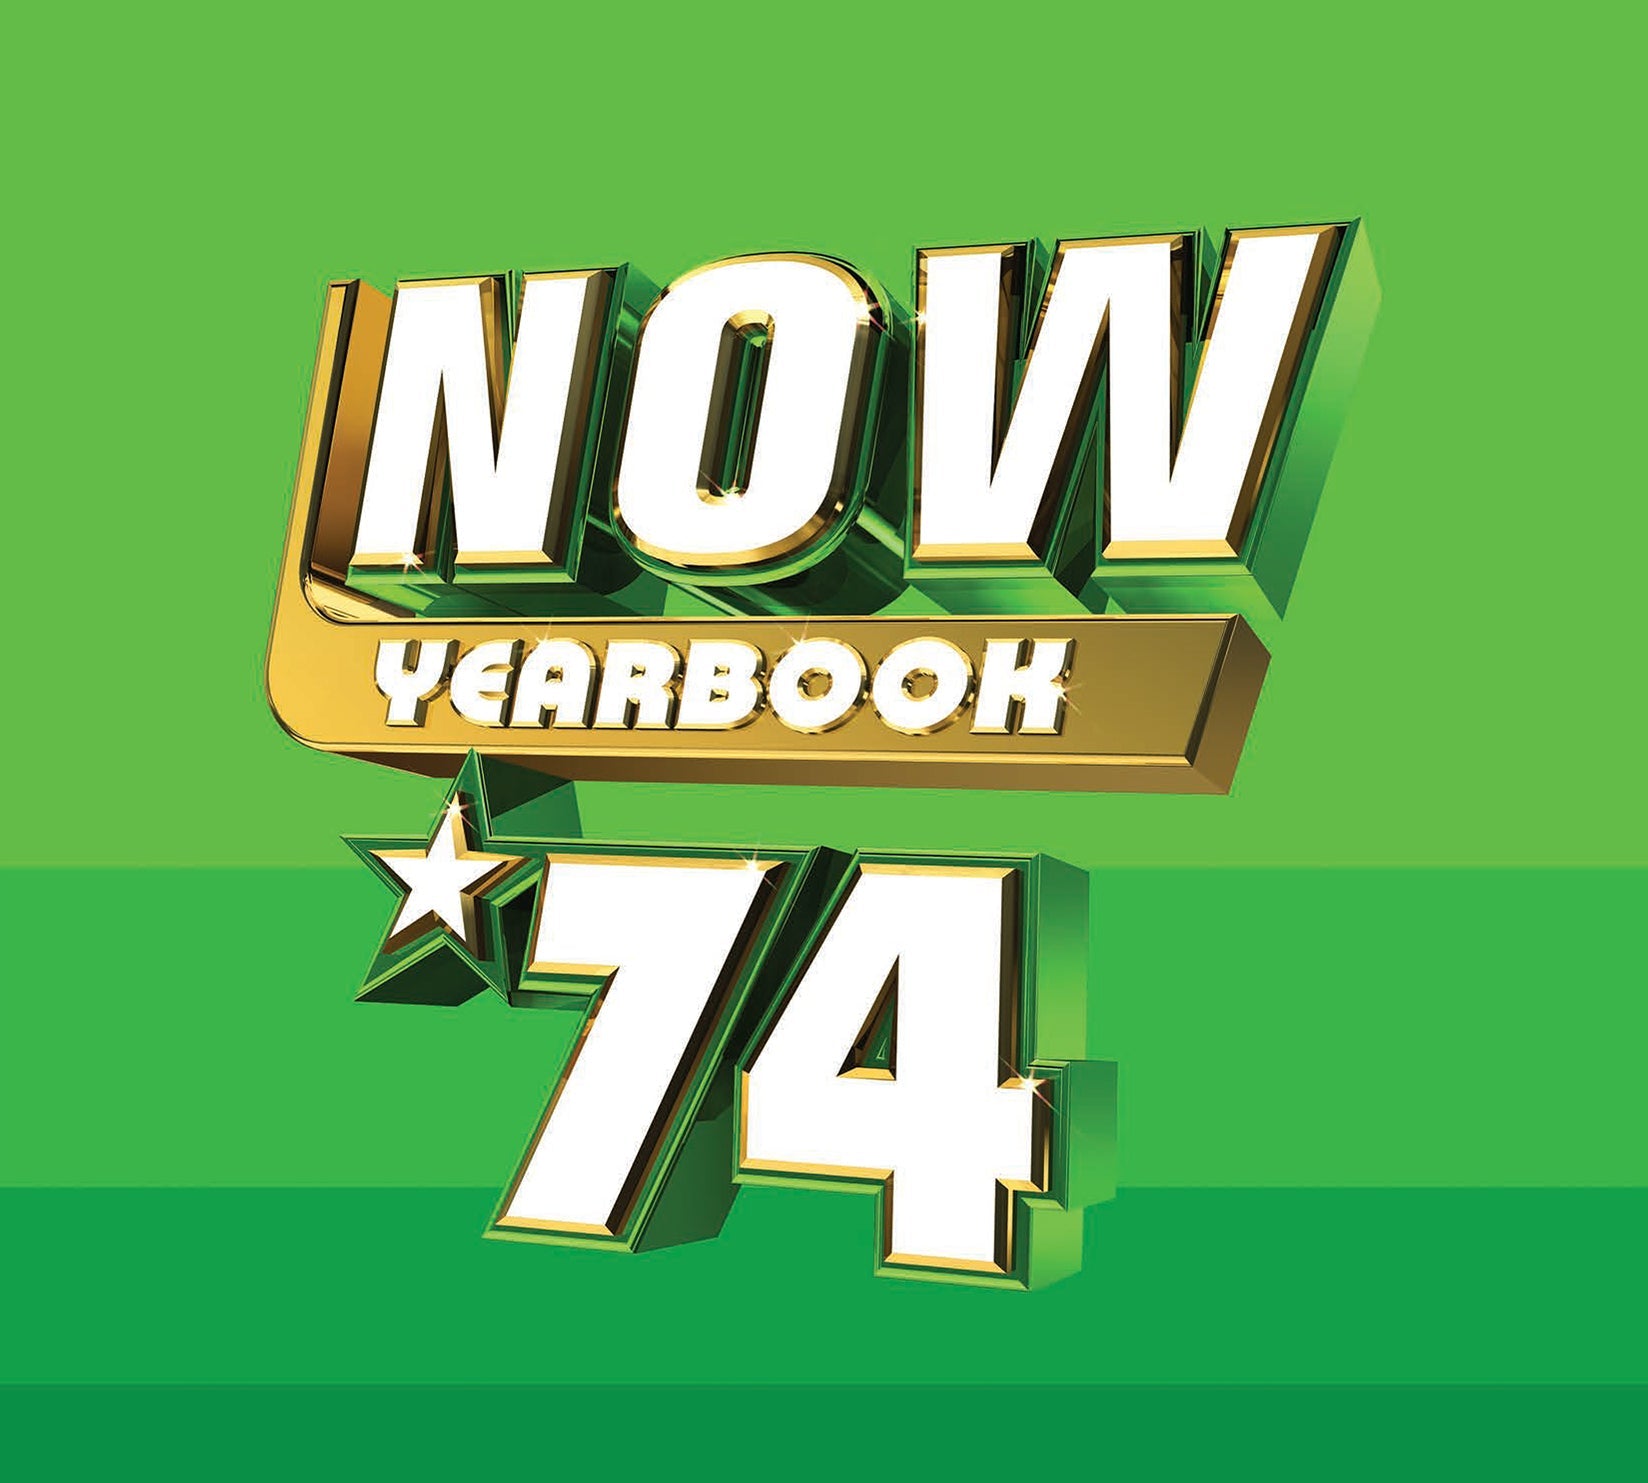 NOW – Yearbook 1974: Green Vinyl 3LP + Limited Numbered 12" Print